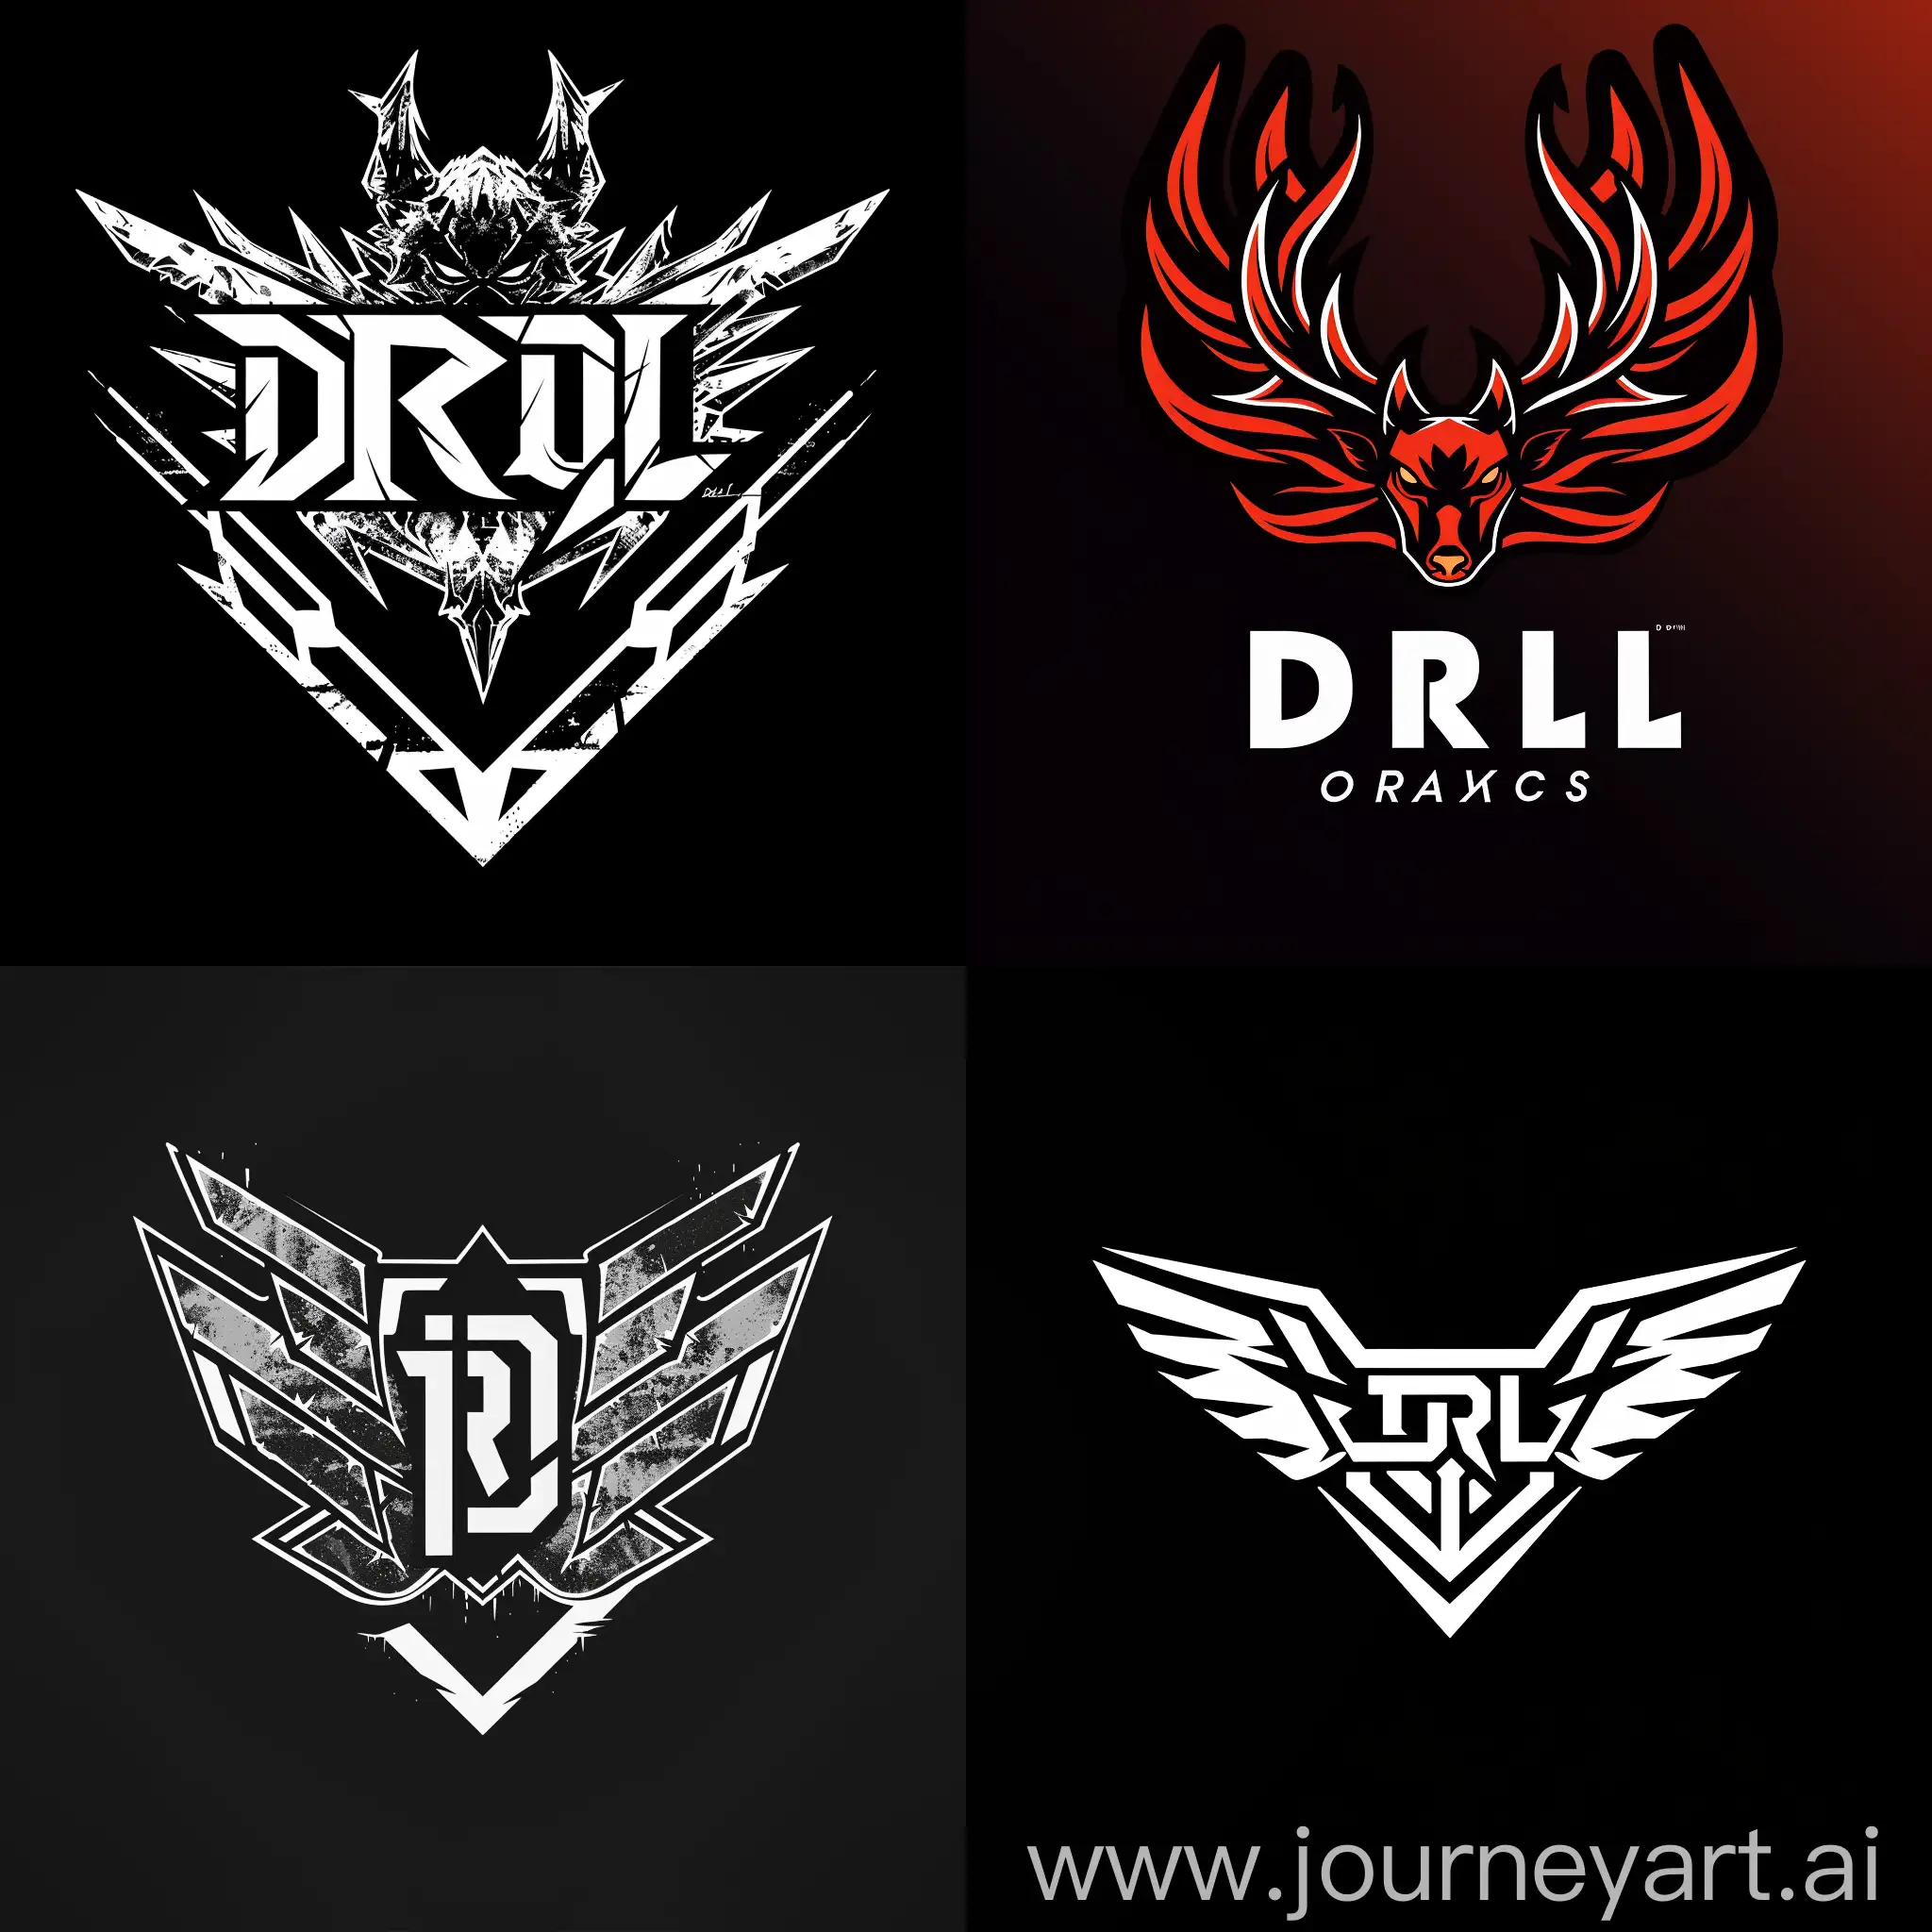 HighQuality-Logo-Design-for-Gaming-Company-with-Symbols-D-R-L